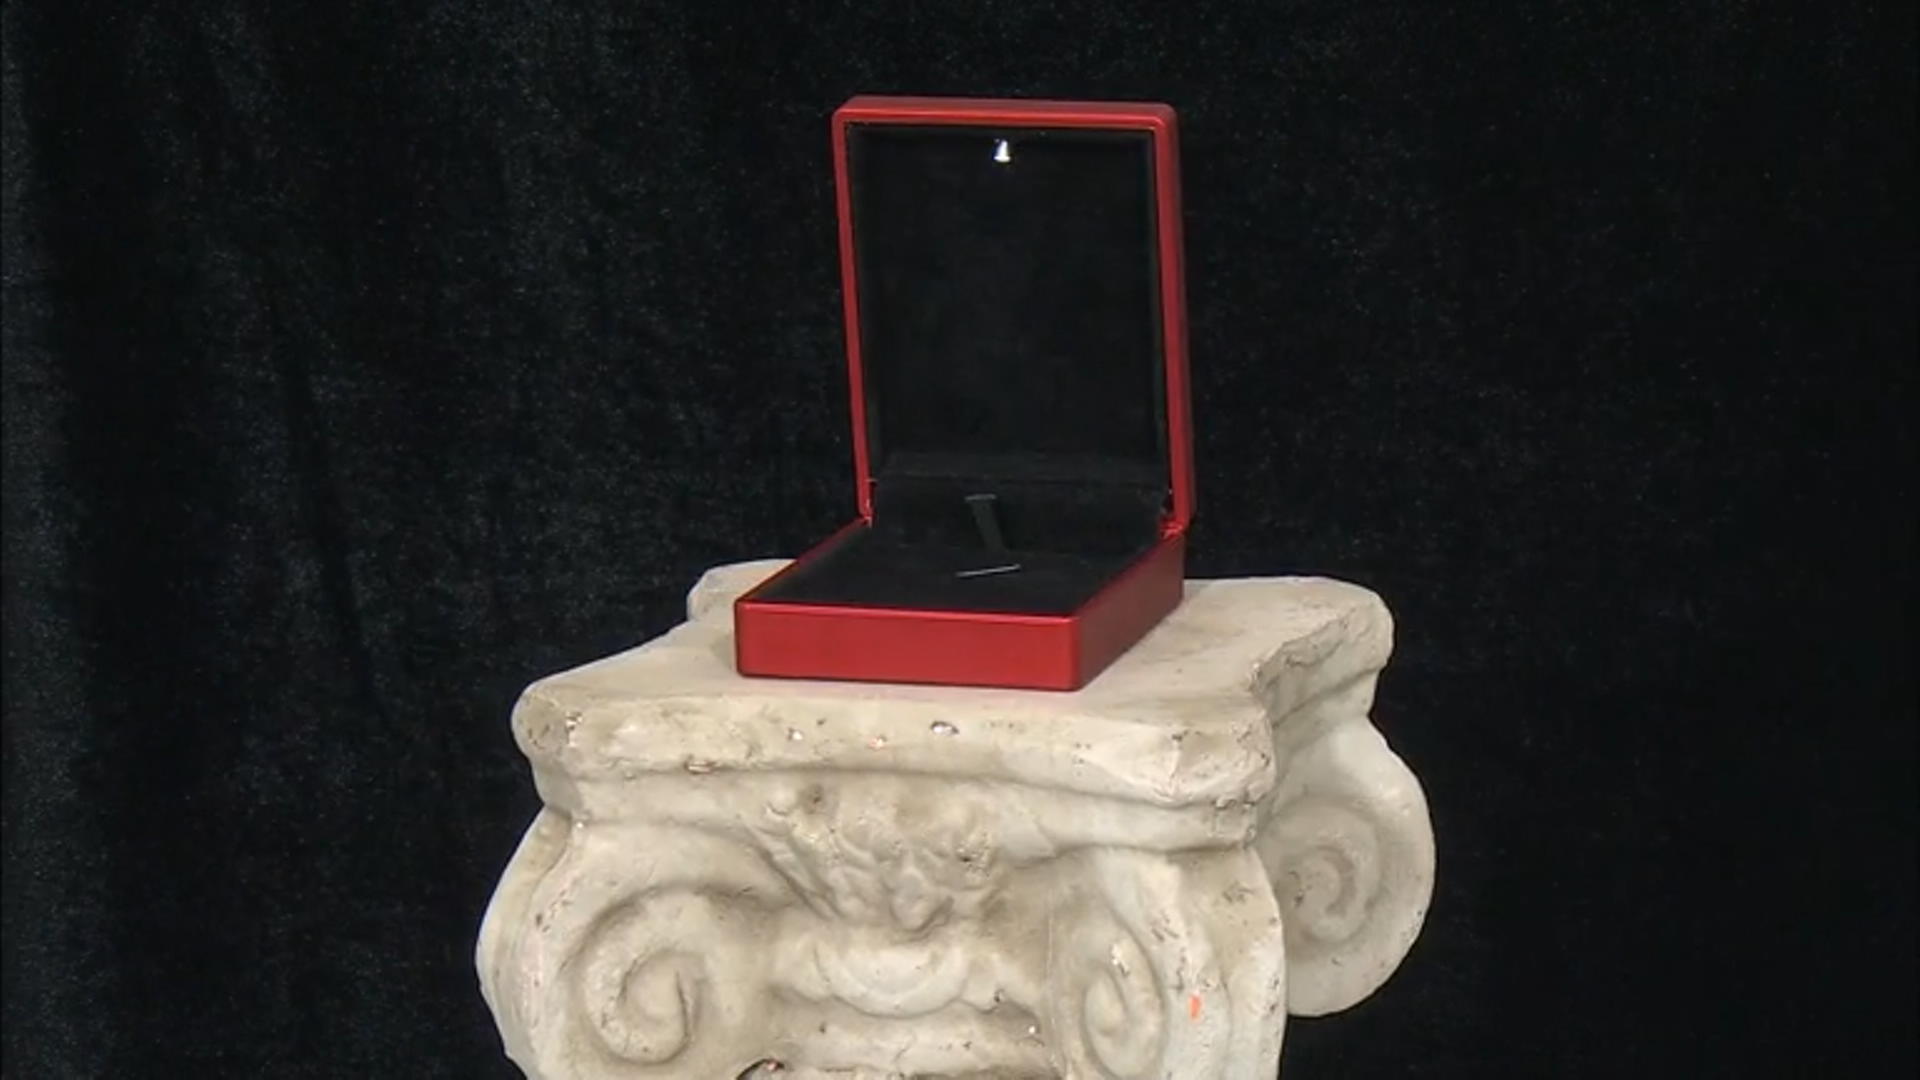 Red Pendant Box with Led Light appx 9x7x3.4cm Video Thumbnail